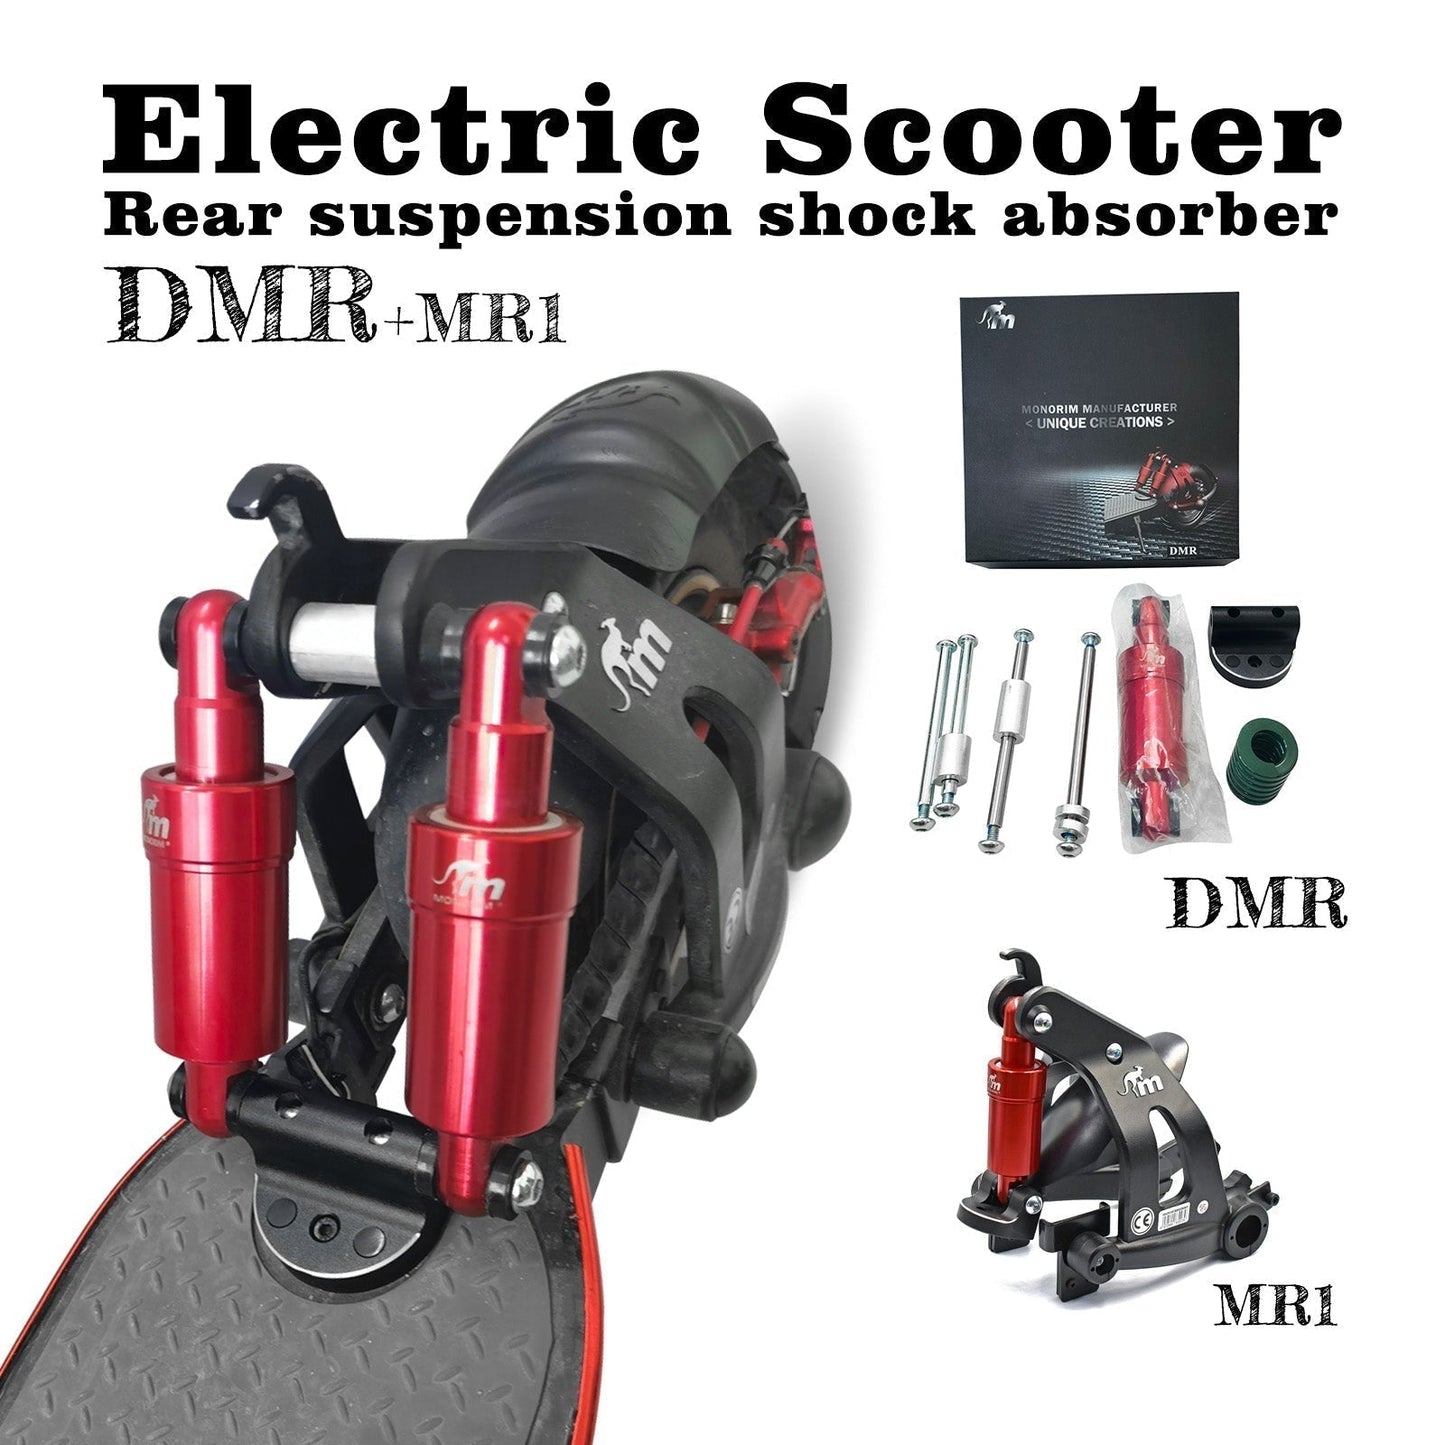 Monorim DMR Upgrade Modified Dual Shock Absorber Accessories For Aovo pro 365g0 Scooter Rear Suspension